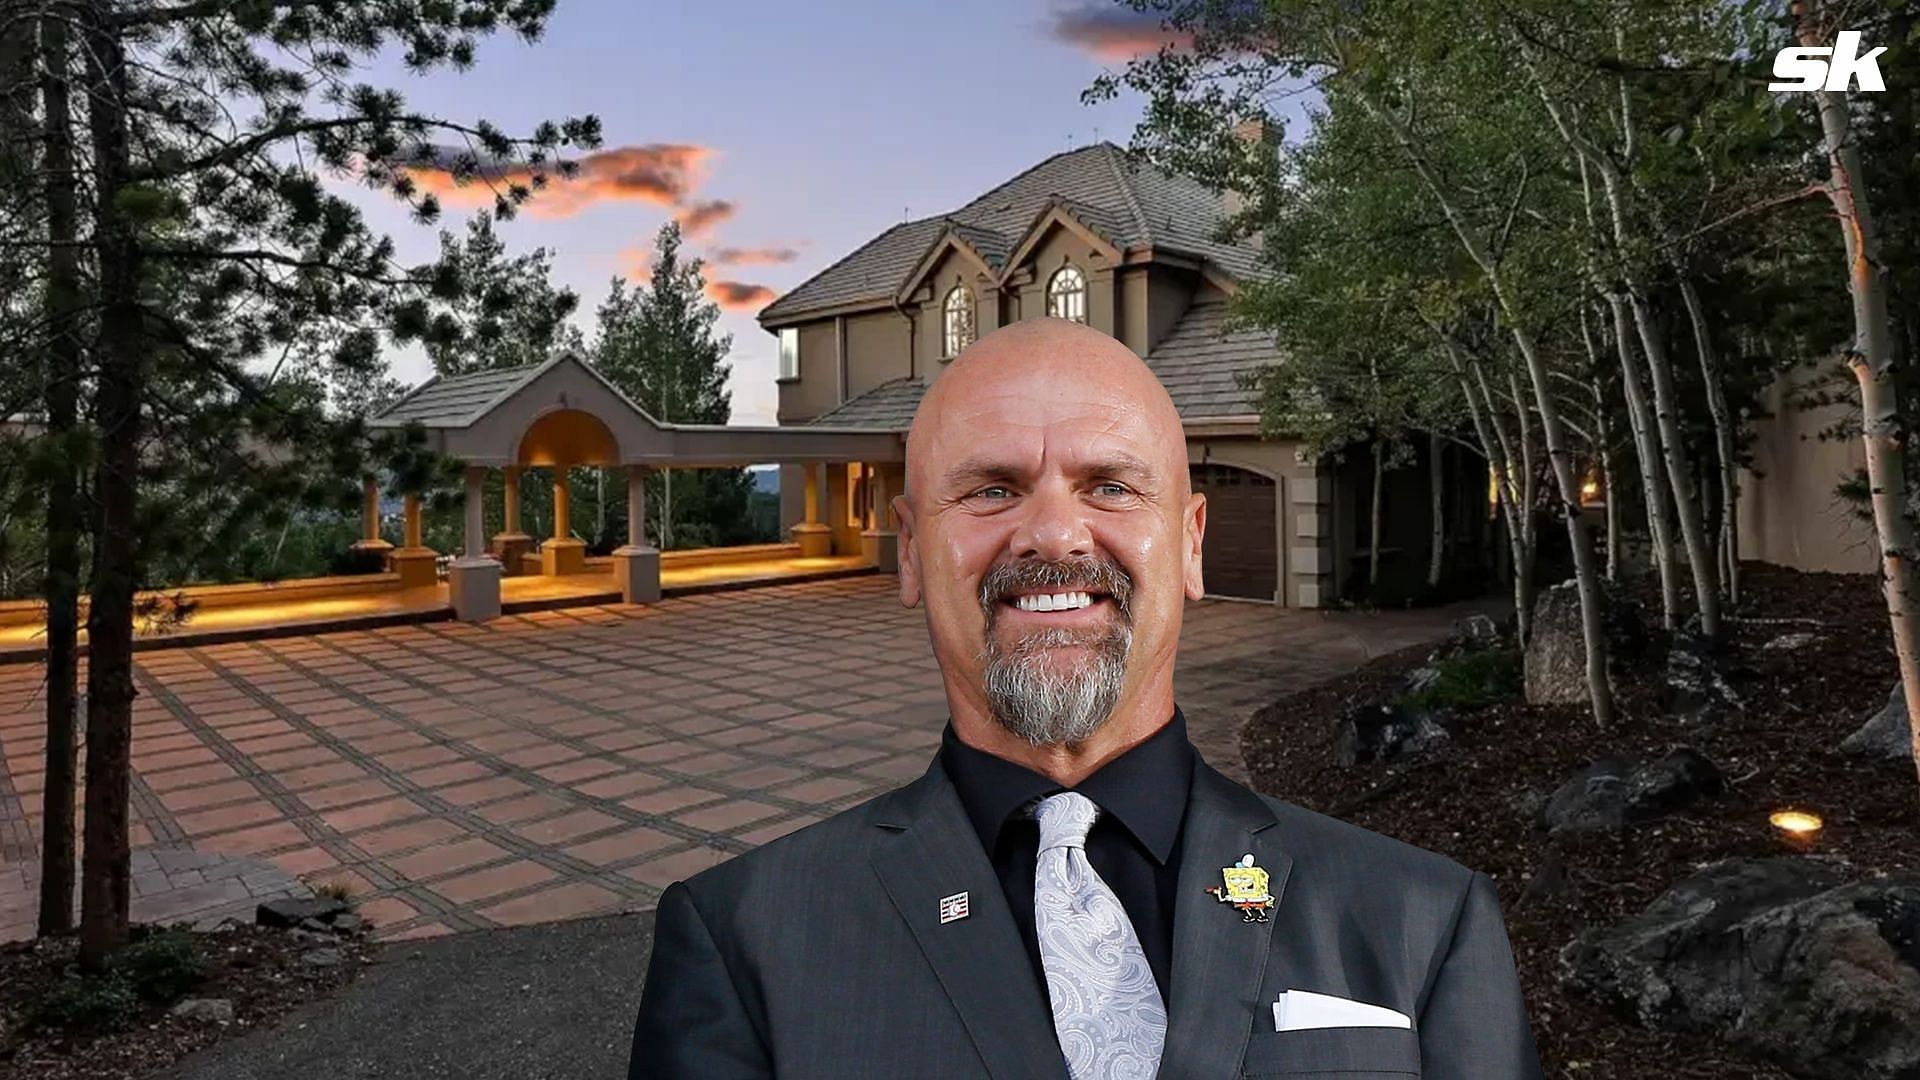 Hall of Famer Larry Walker listed his Colorado home for almost $4 million last year